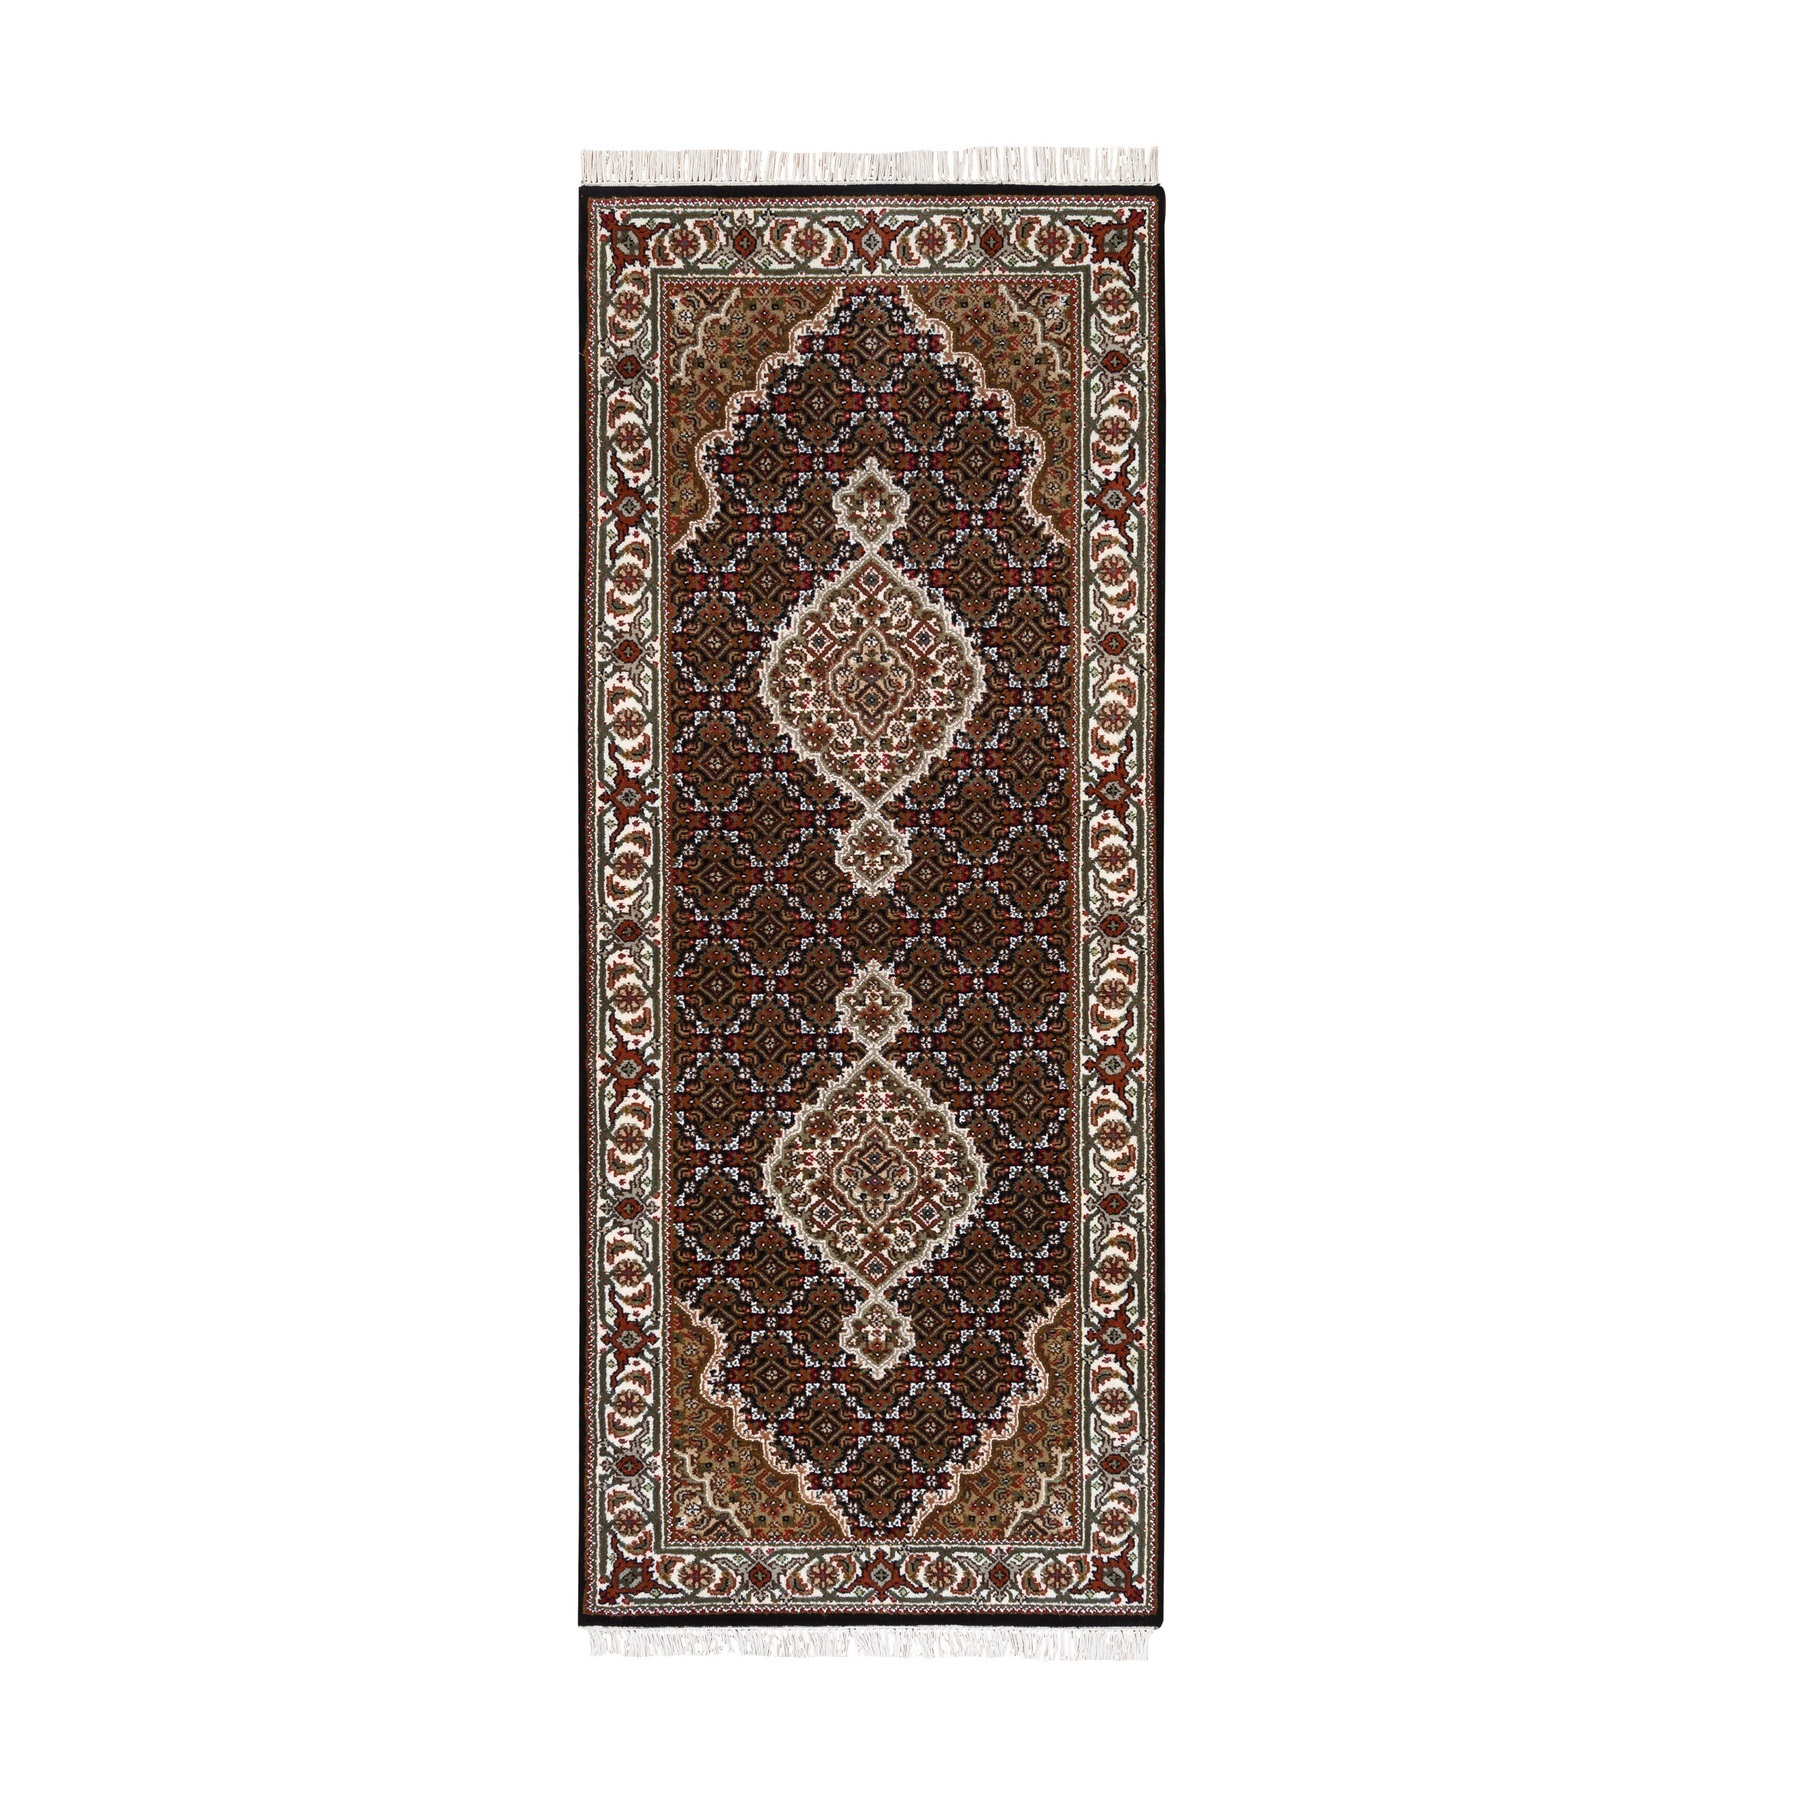 Pirniakan Collection Hand Knotted Black Rug No: 1124990